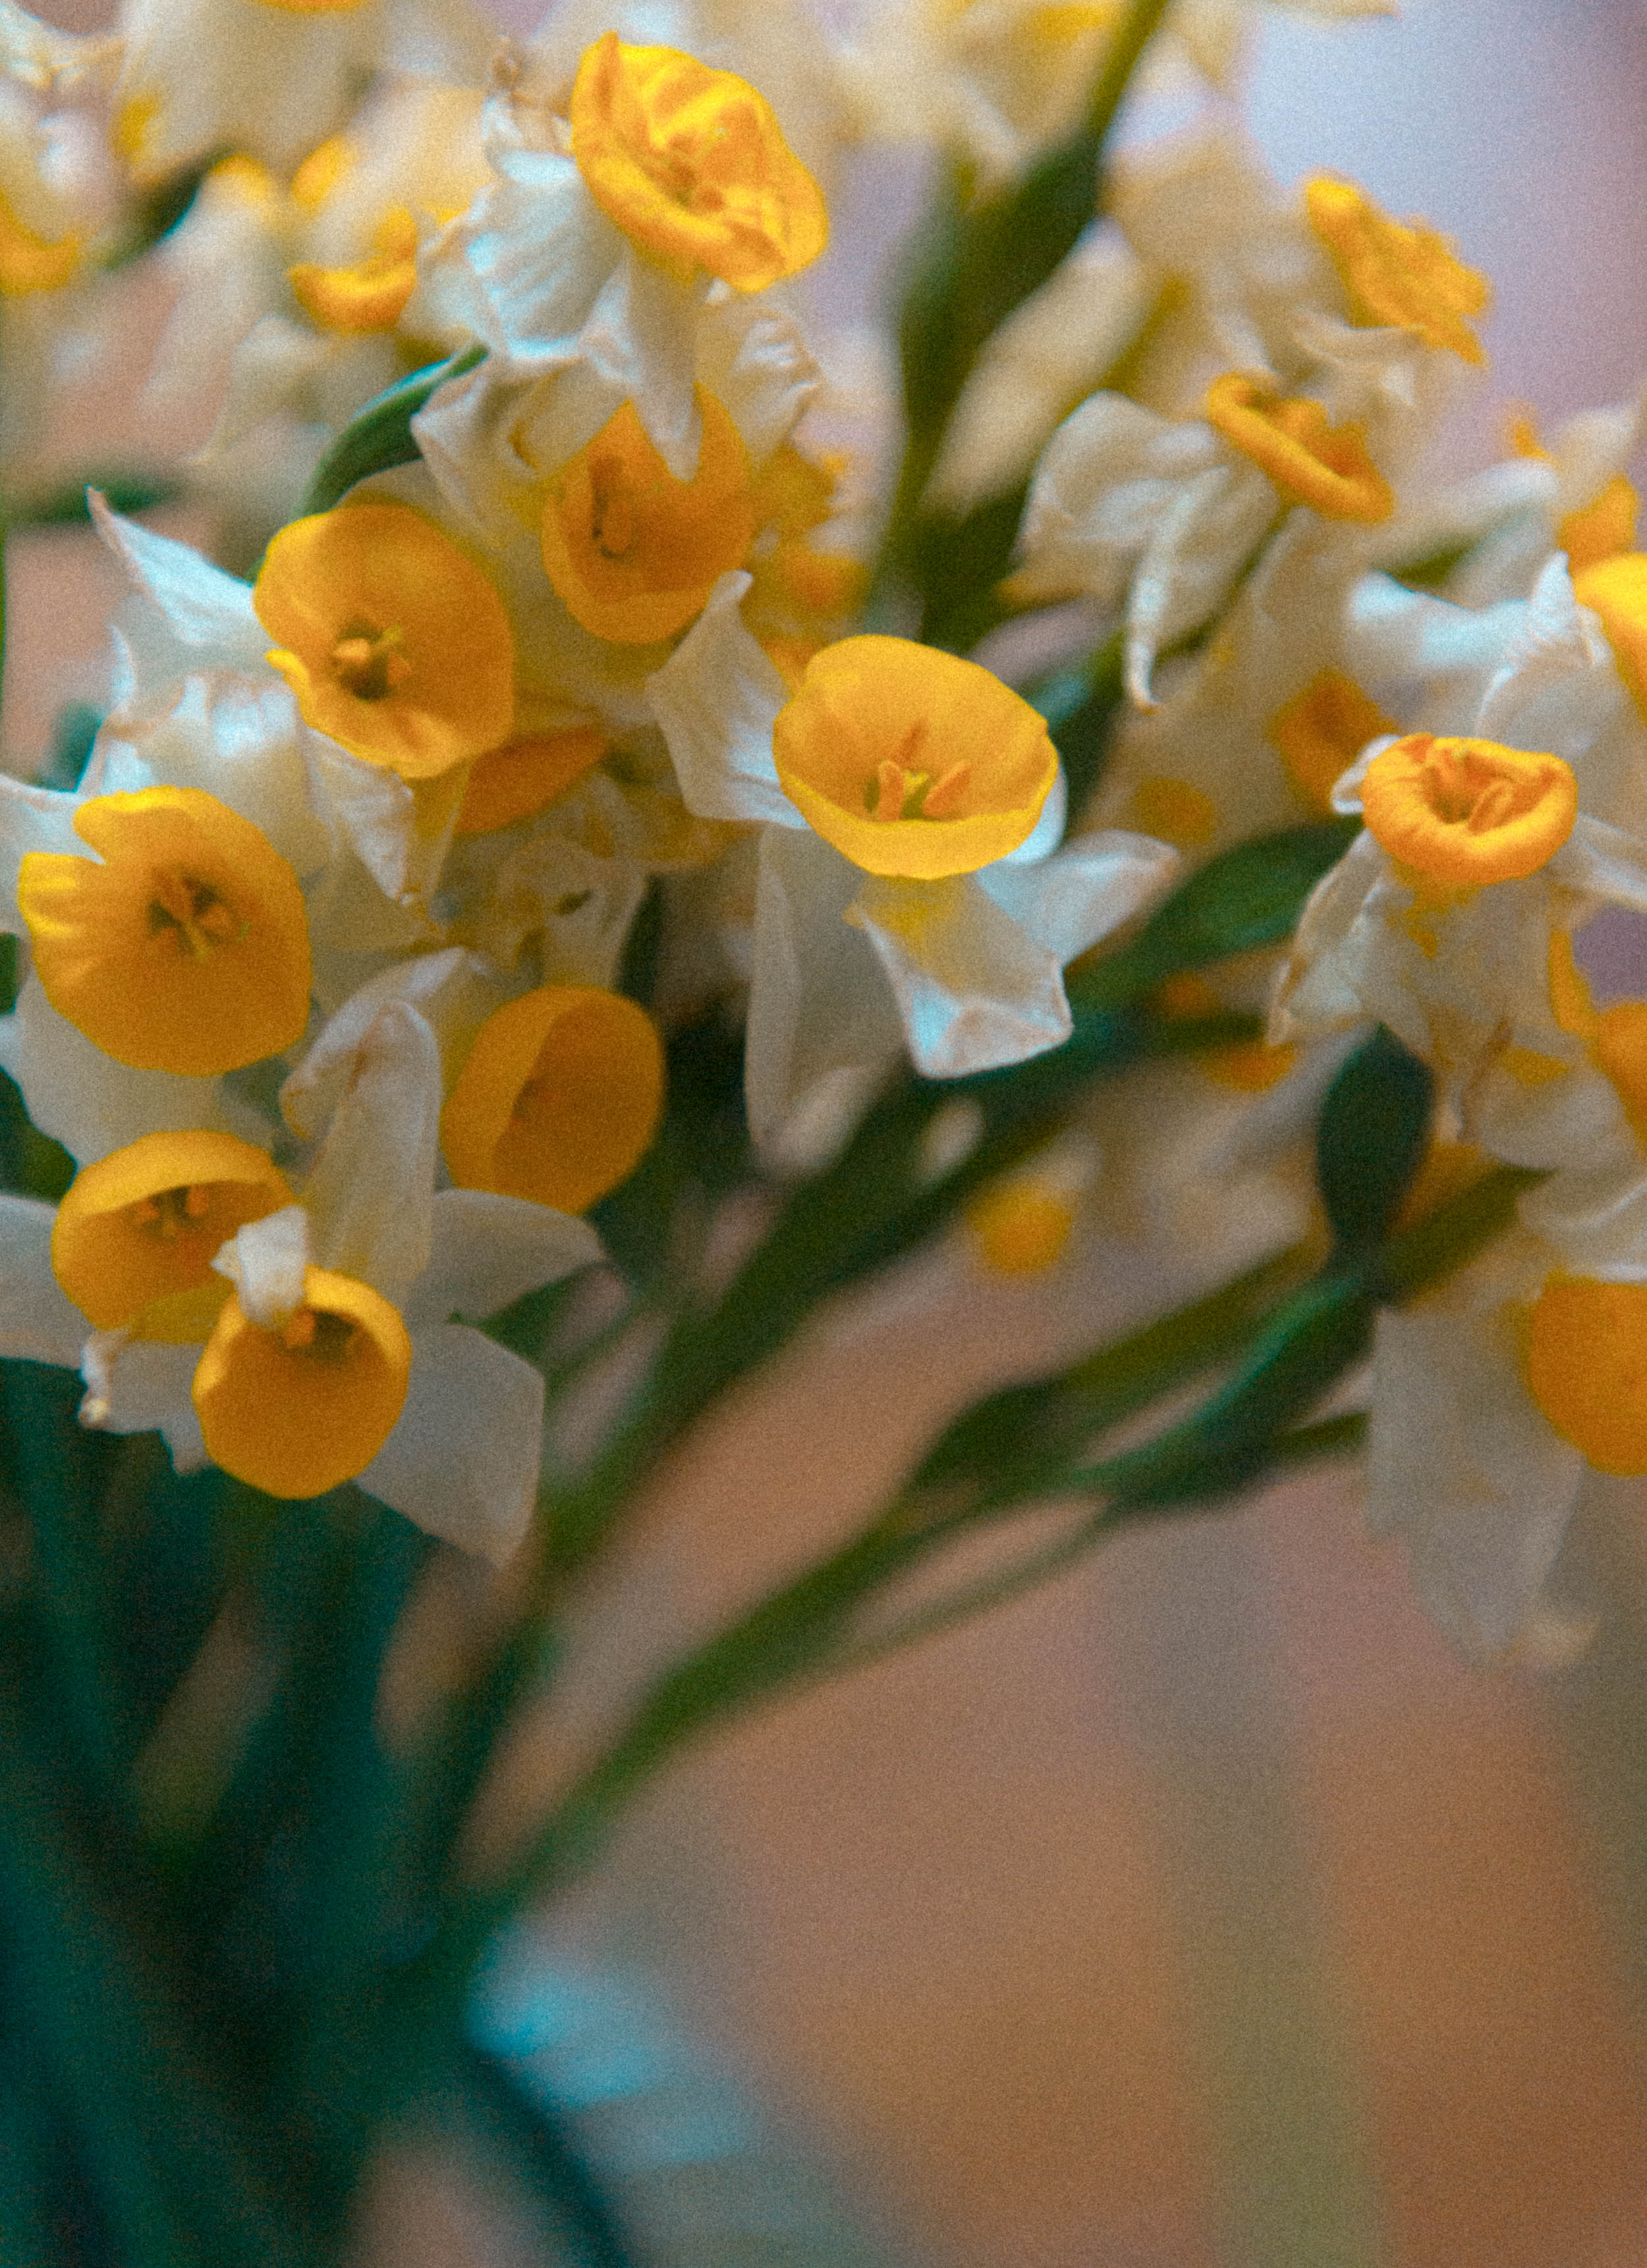 daffodils, still life photography, nargis, narcissus, flowers, art exhibit, friends, preserving flowers, dried flowers, flower art, artwork made of dried flowers